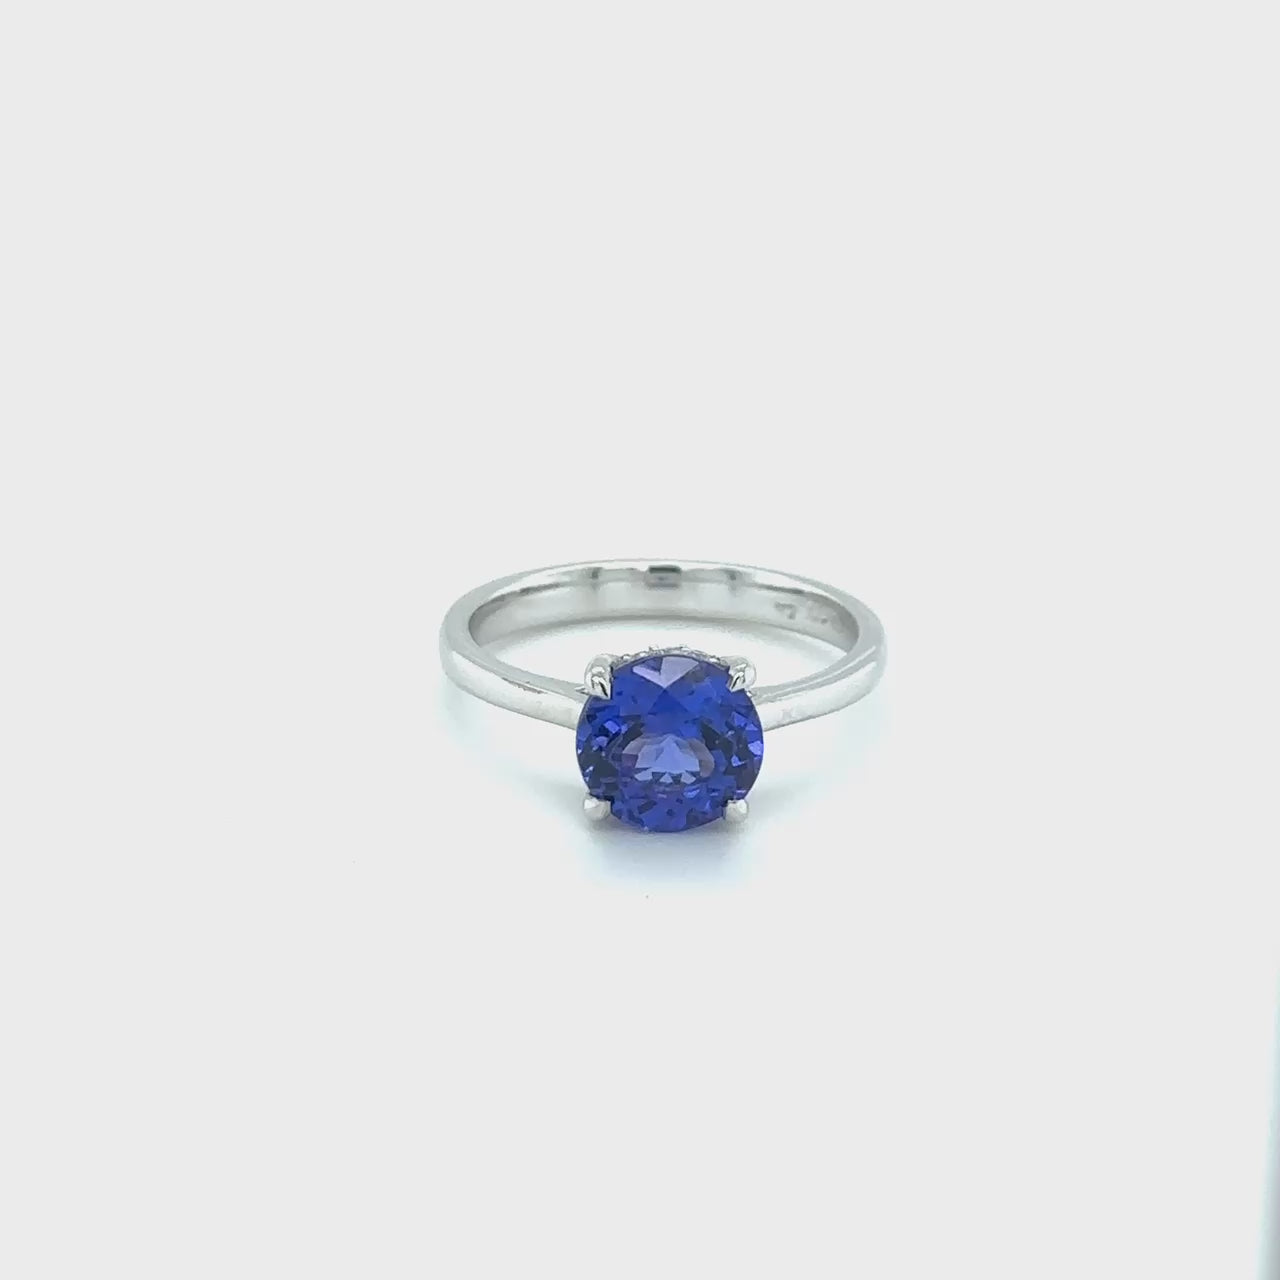 Round Solitaire Tanzanite & Diamond Ring": "A stunning round solitaire Tanzanite ring featuring a sparkling diamond accent, perfect for adding elegance and sophistication to any outfit, ideal for special occasions or everyday wear.